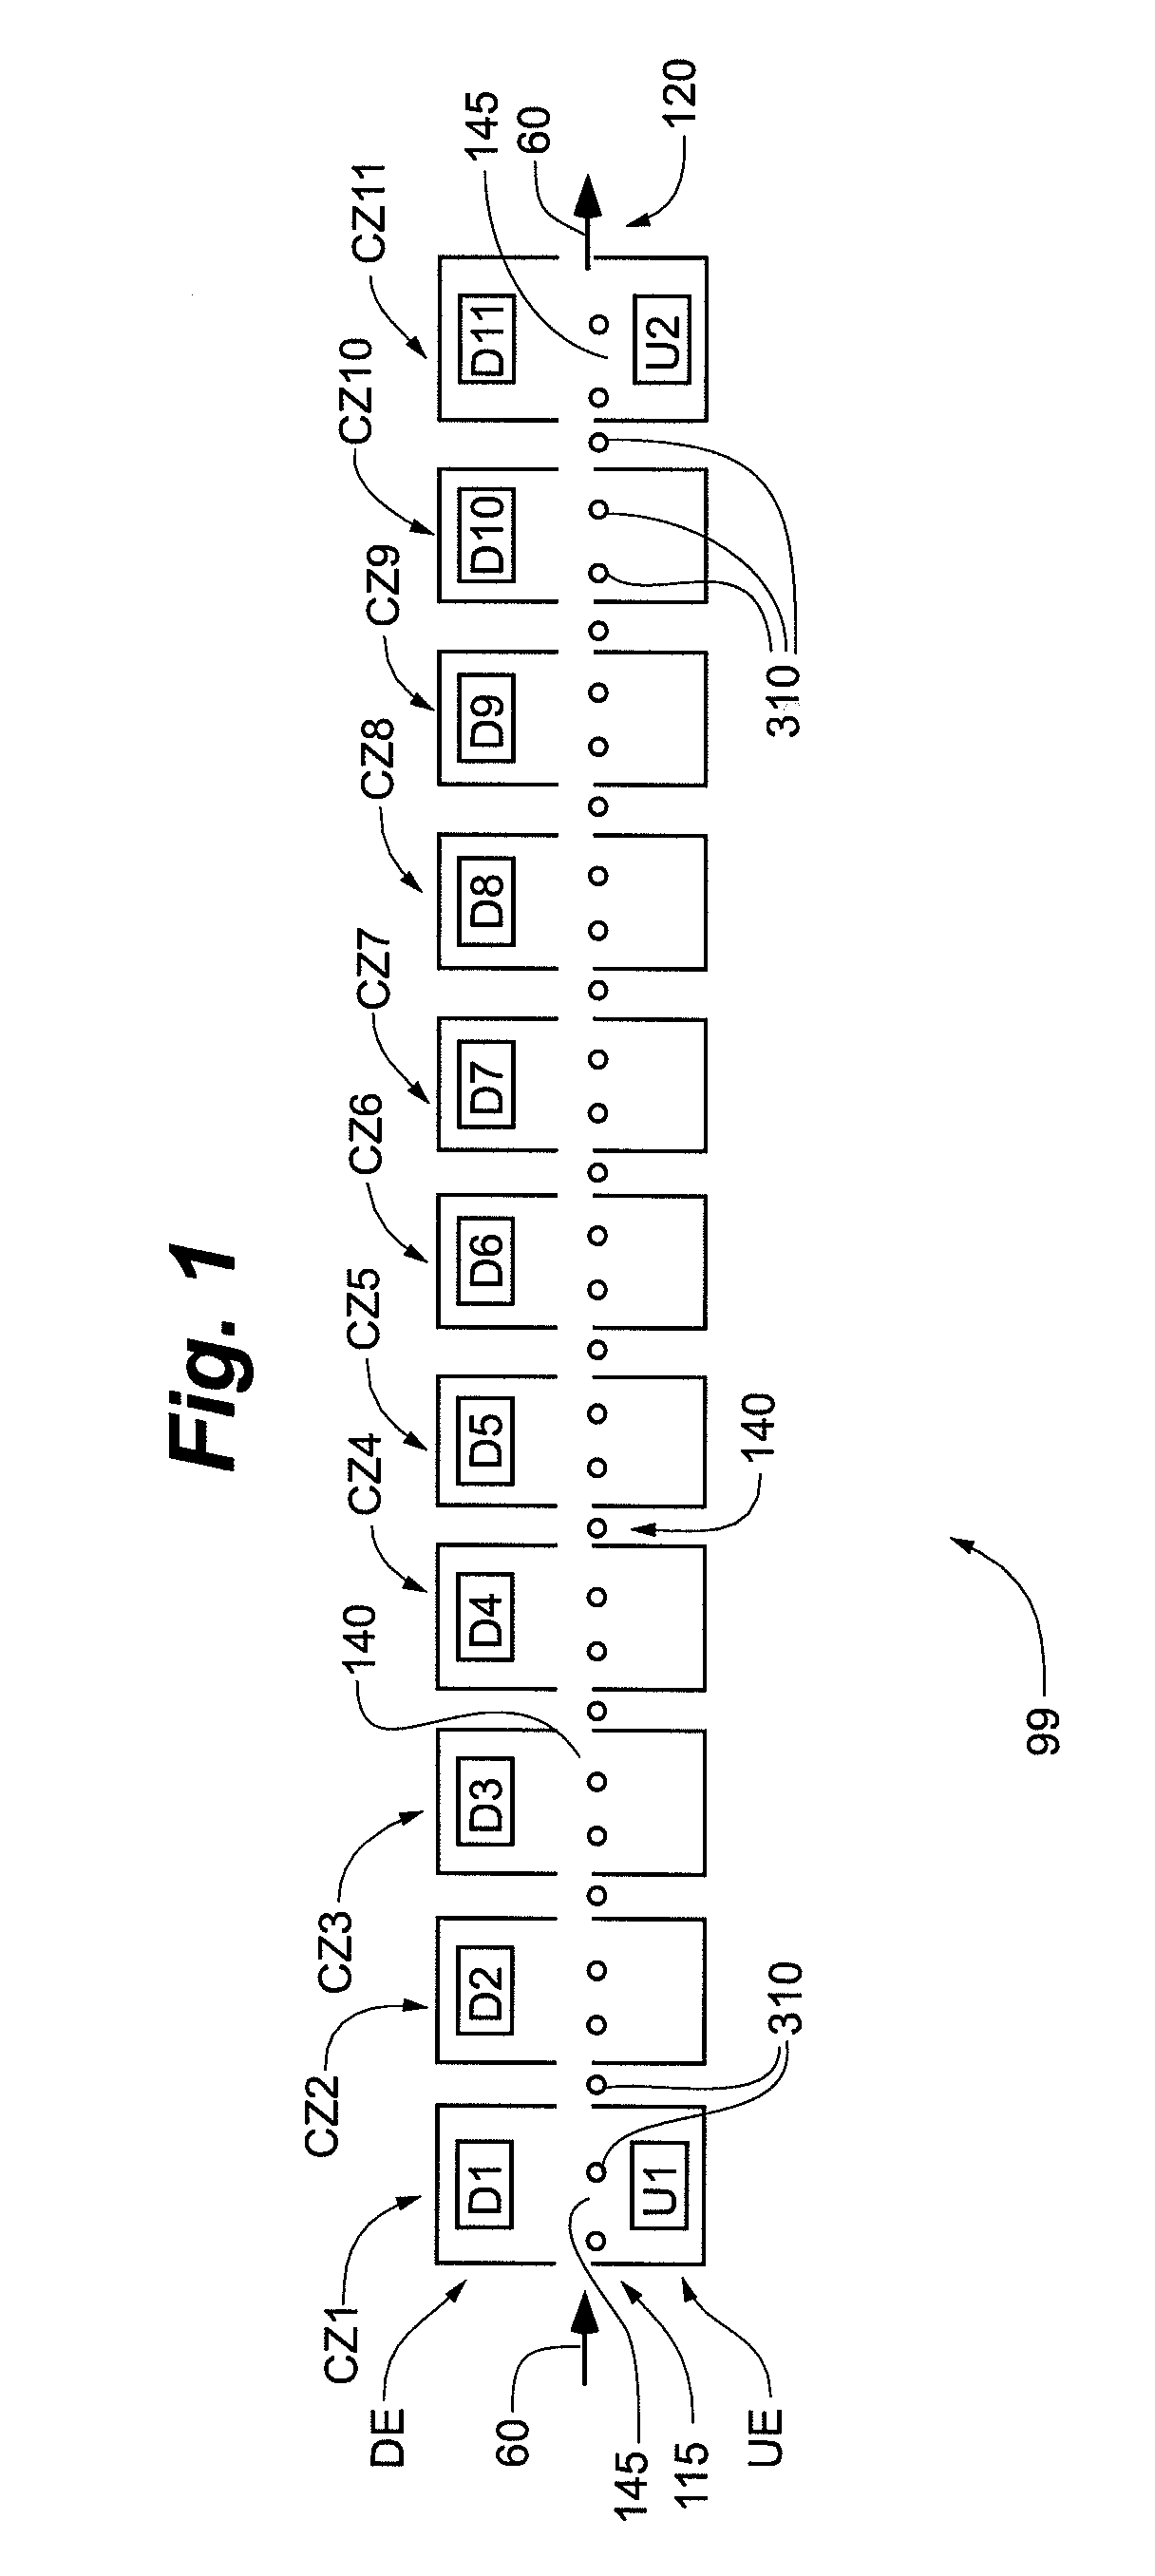 Methods and equipment for depositing coatings having sequenced structures